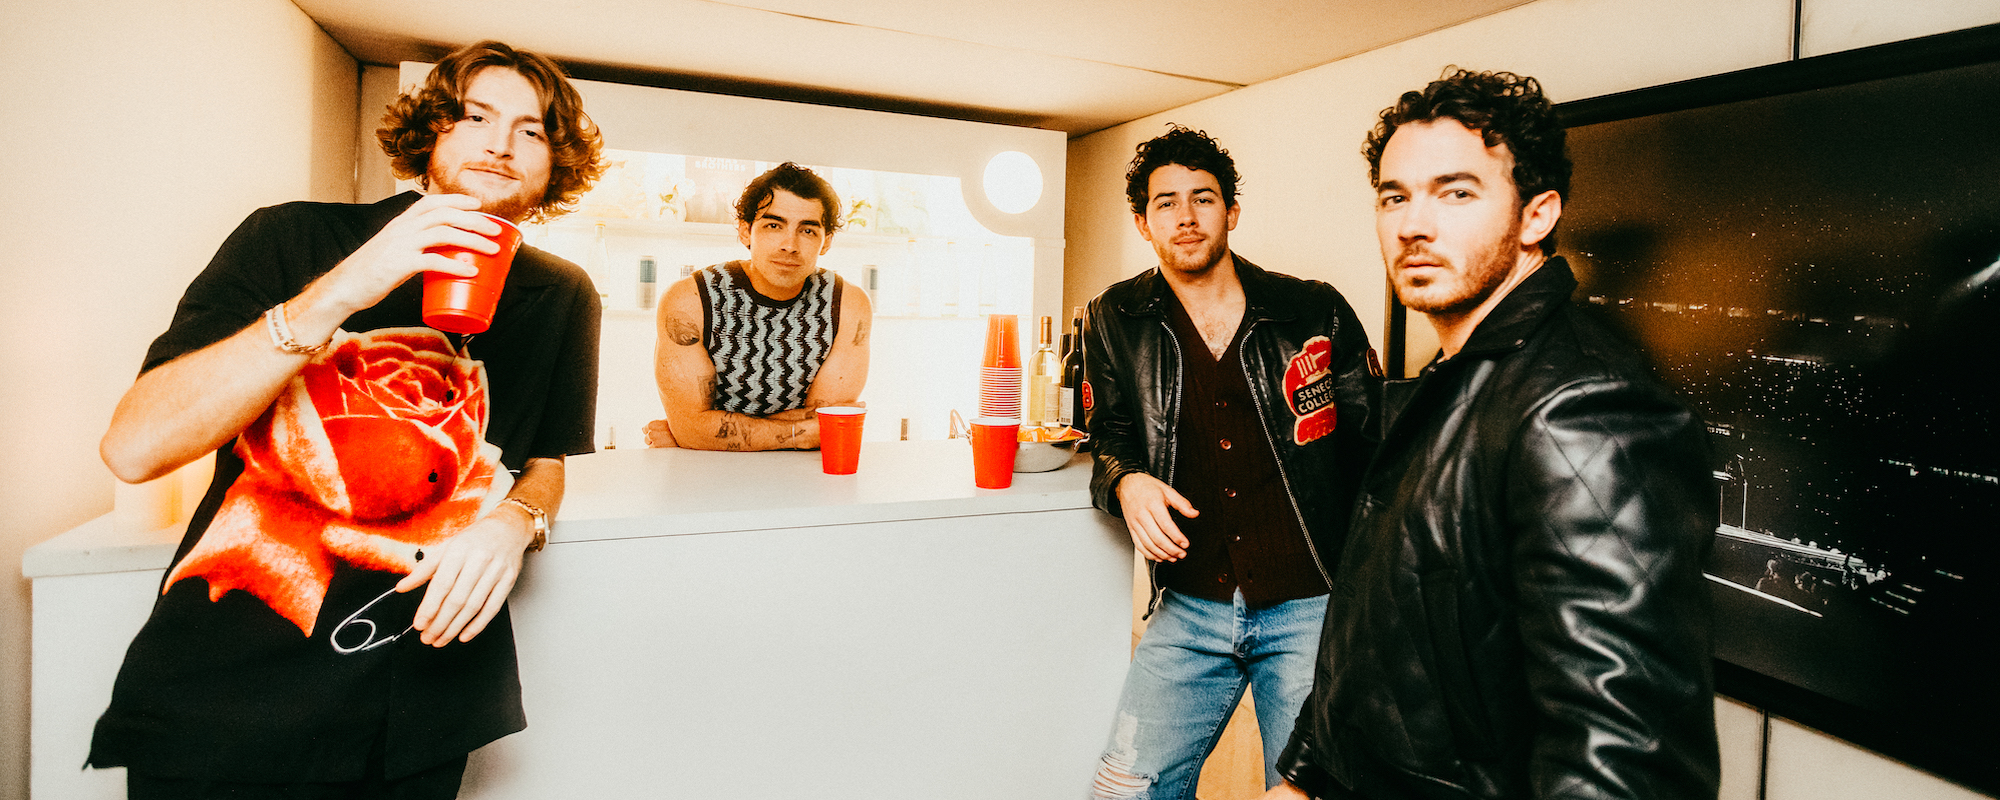 Jonas Brothers Bring Bailey Zimmerman on Board for New Single “Strong Enough”